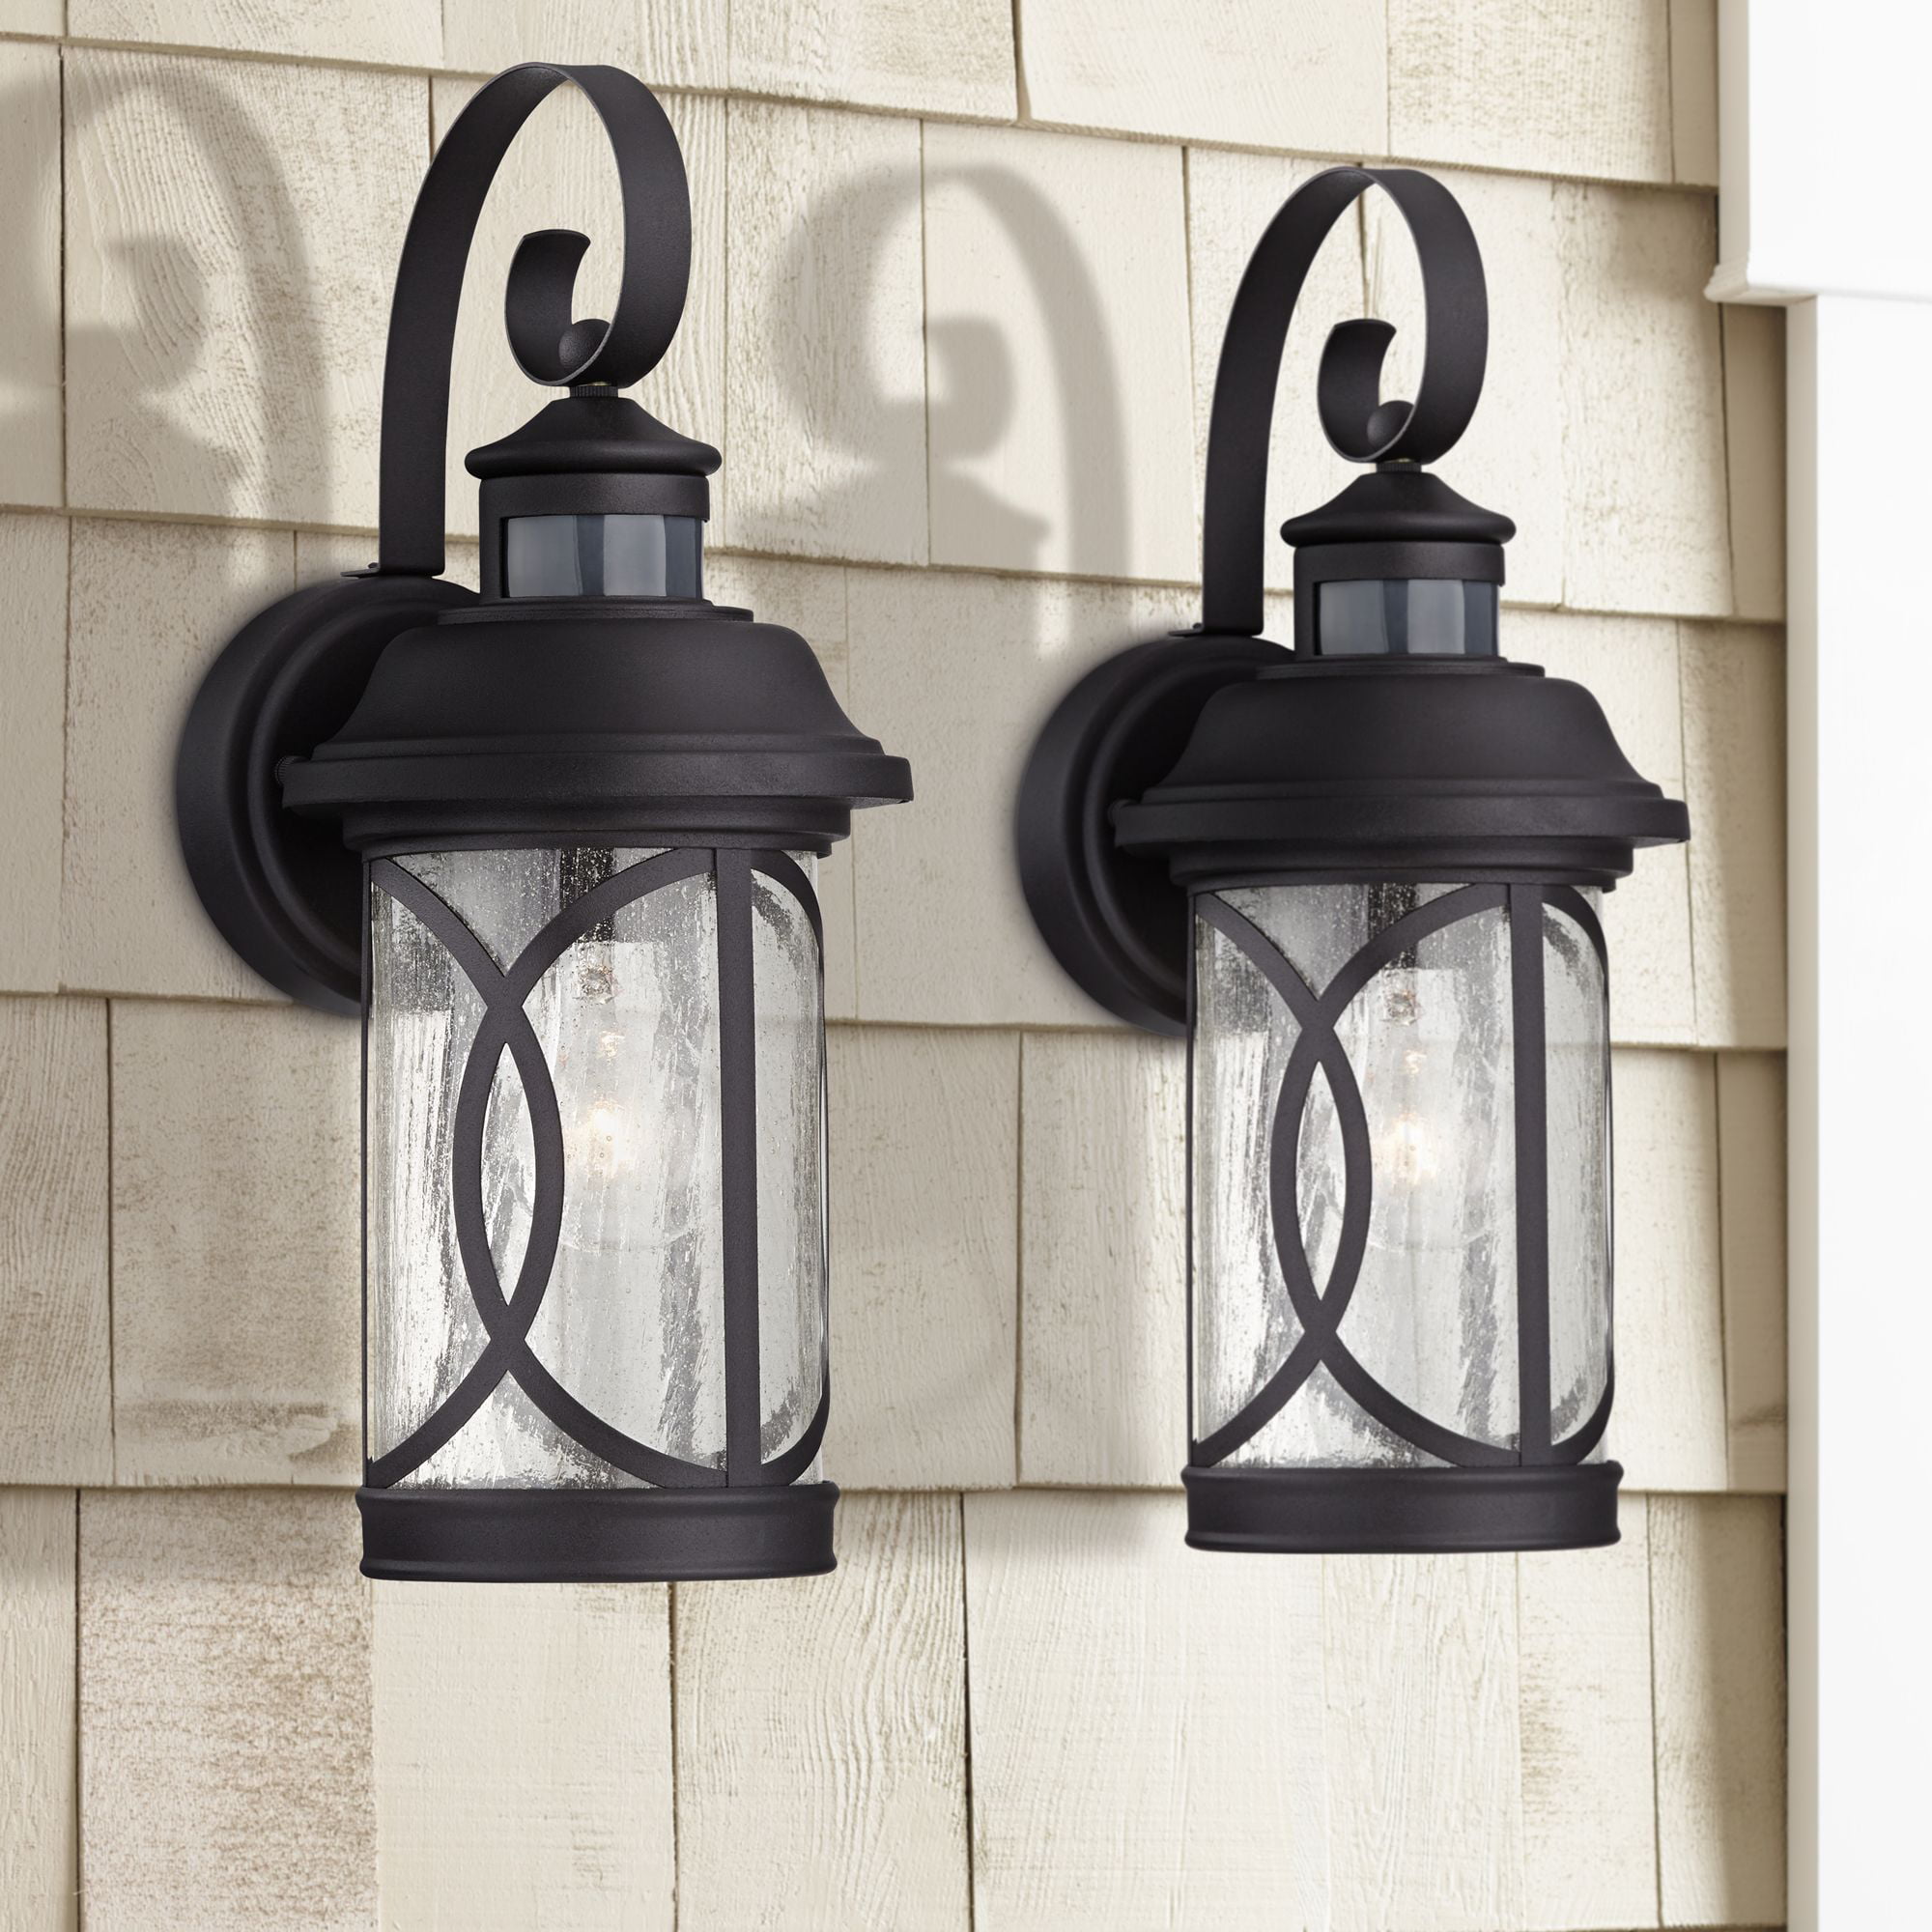 Seeded Glass Dusk To Dawn Motion Sensor, Outdoor Wall Light Fixtures Dusk To Dawn